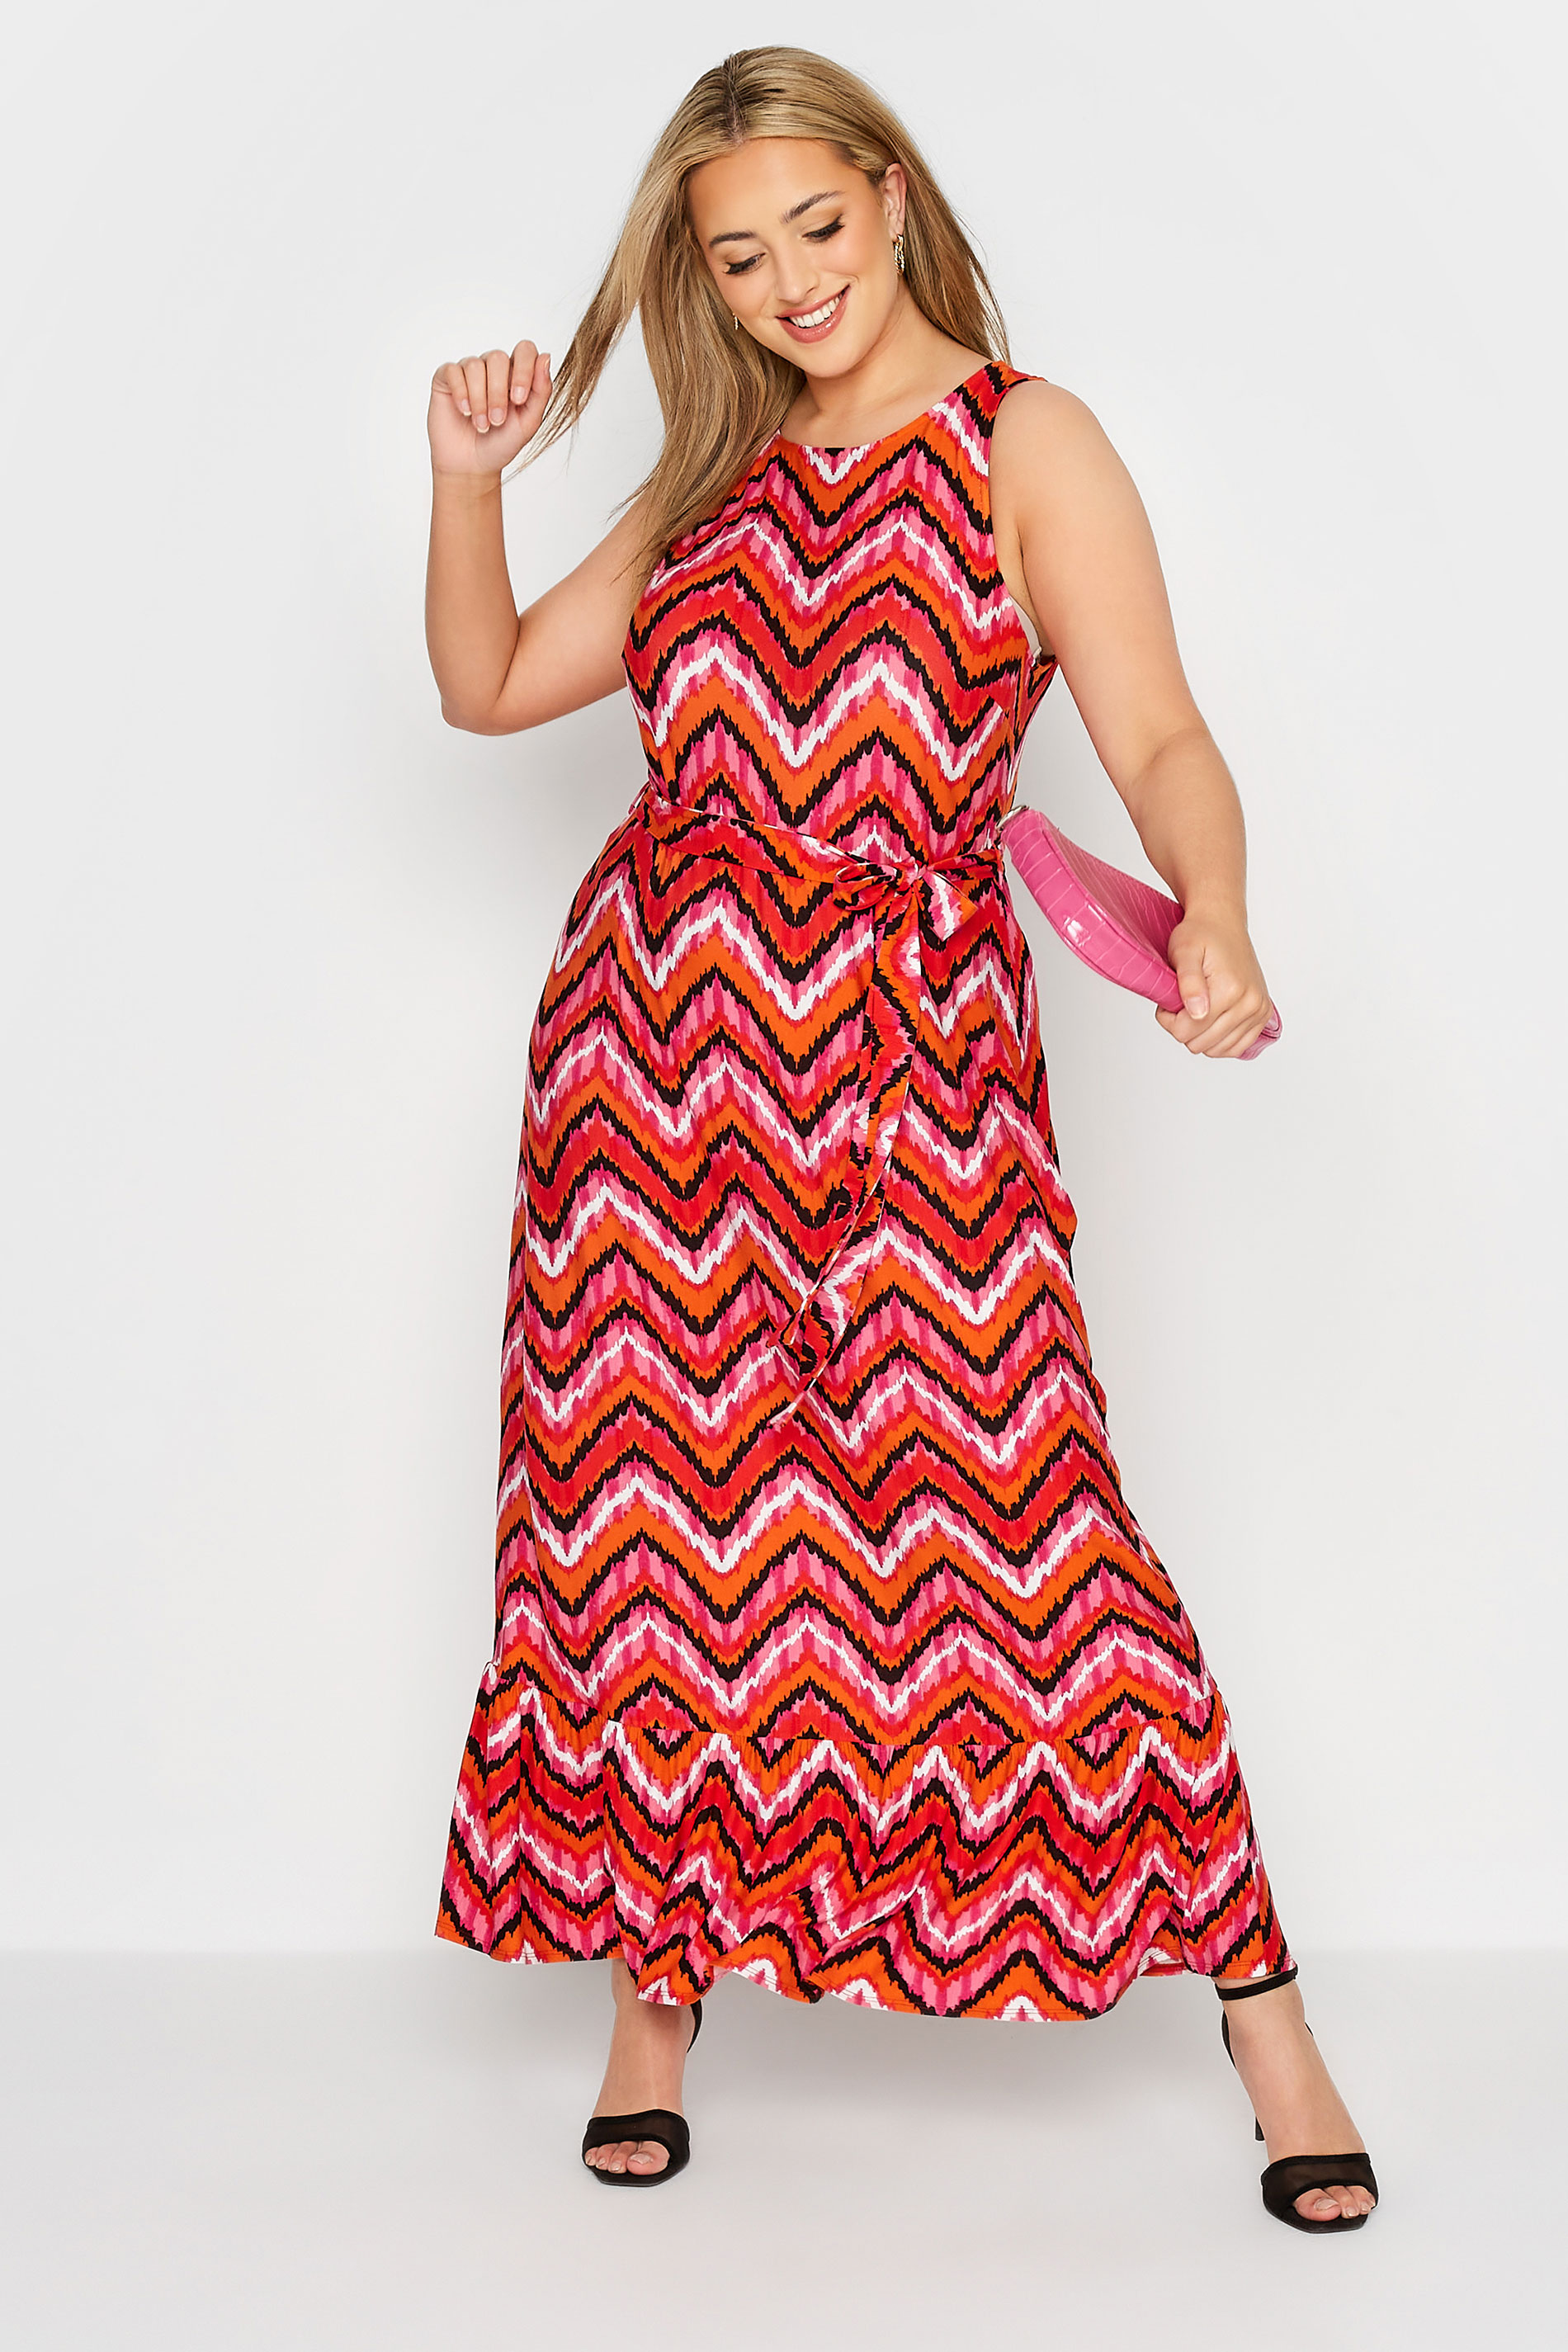 Robes Grande Taille Grande taille  Robes Longues | YOURS LONDON Curve Orange Geometric Print Tiered Maxi Dress - GV09650